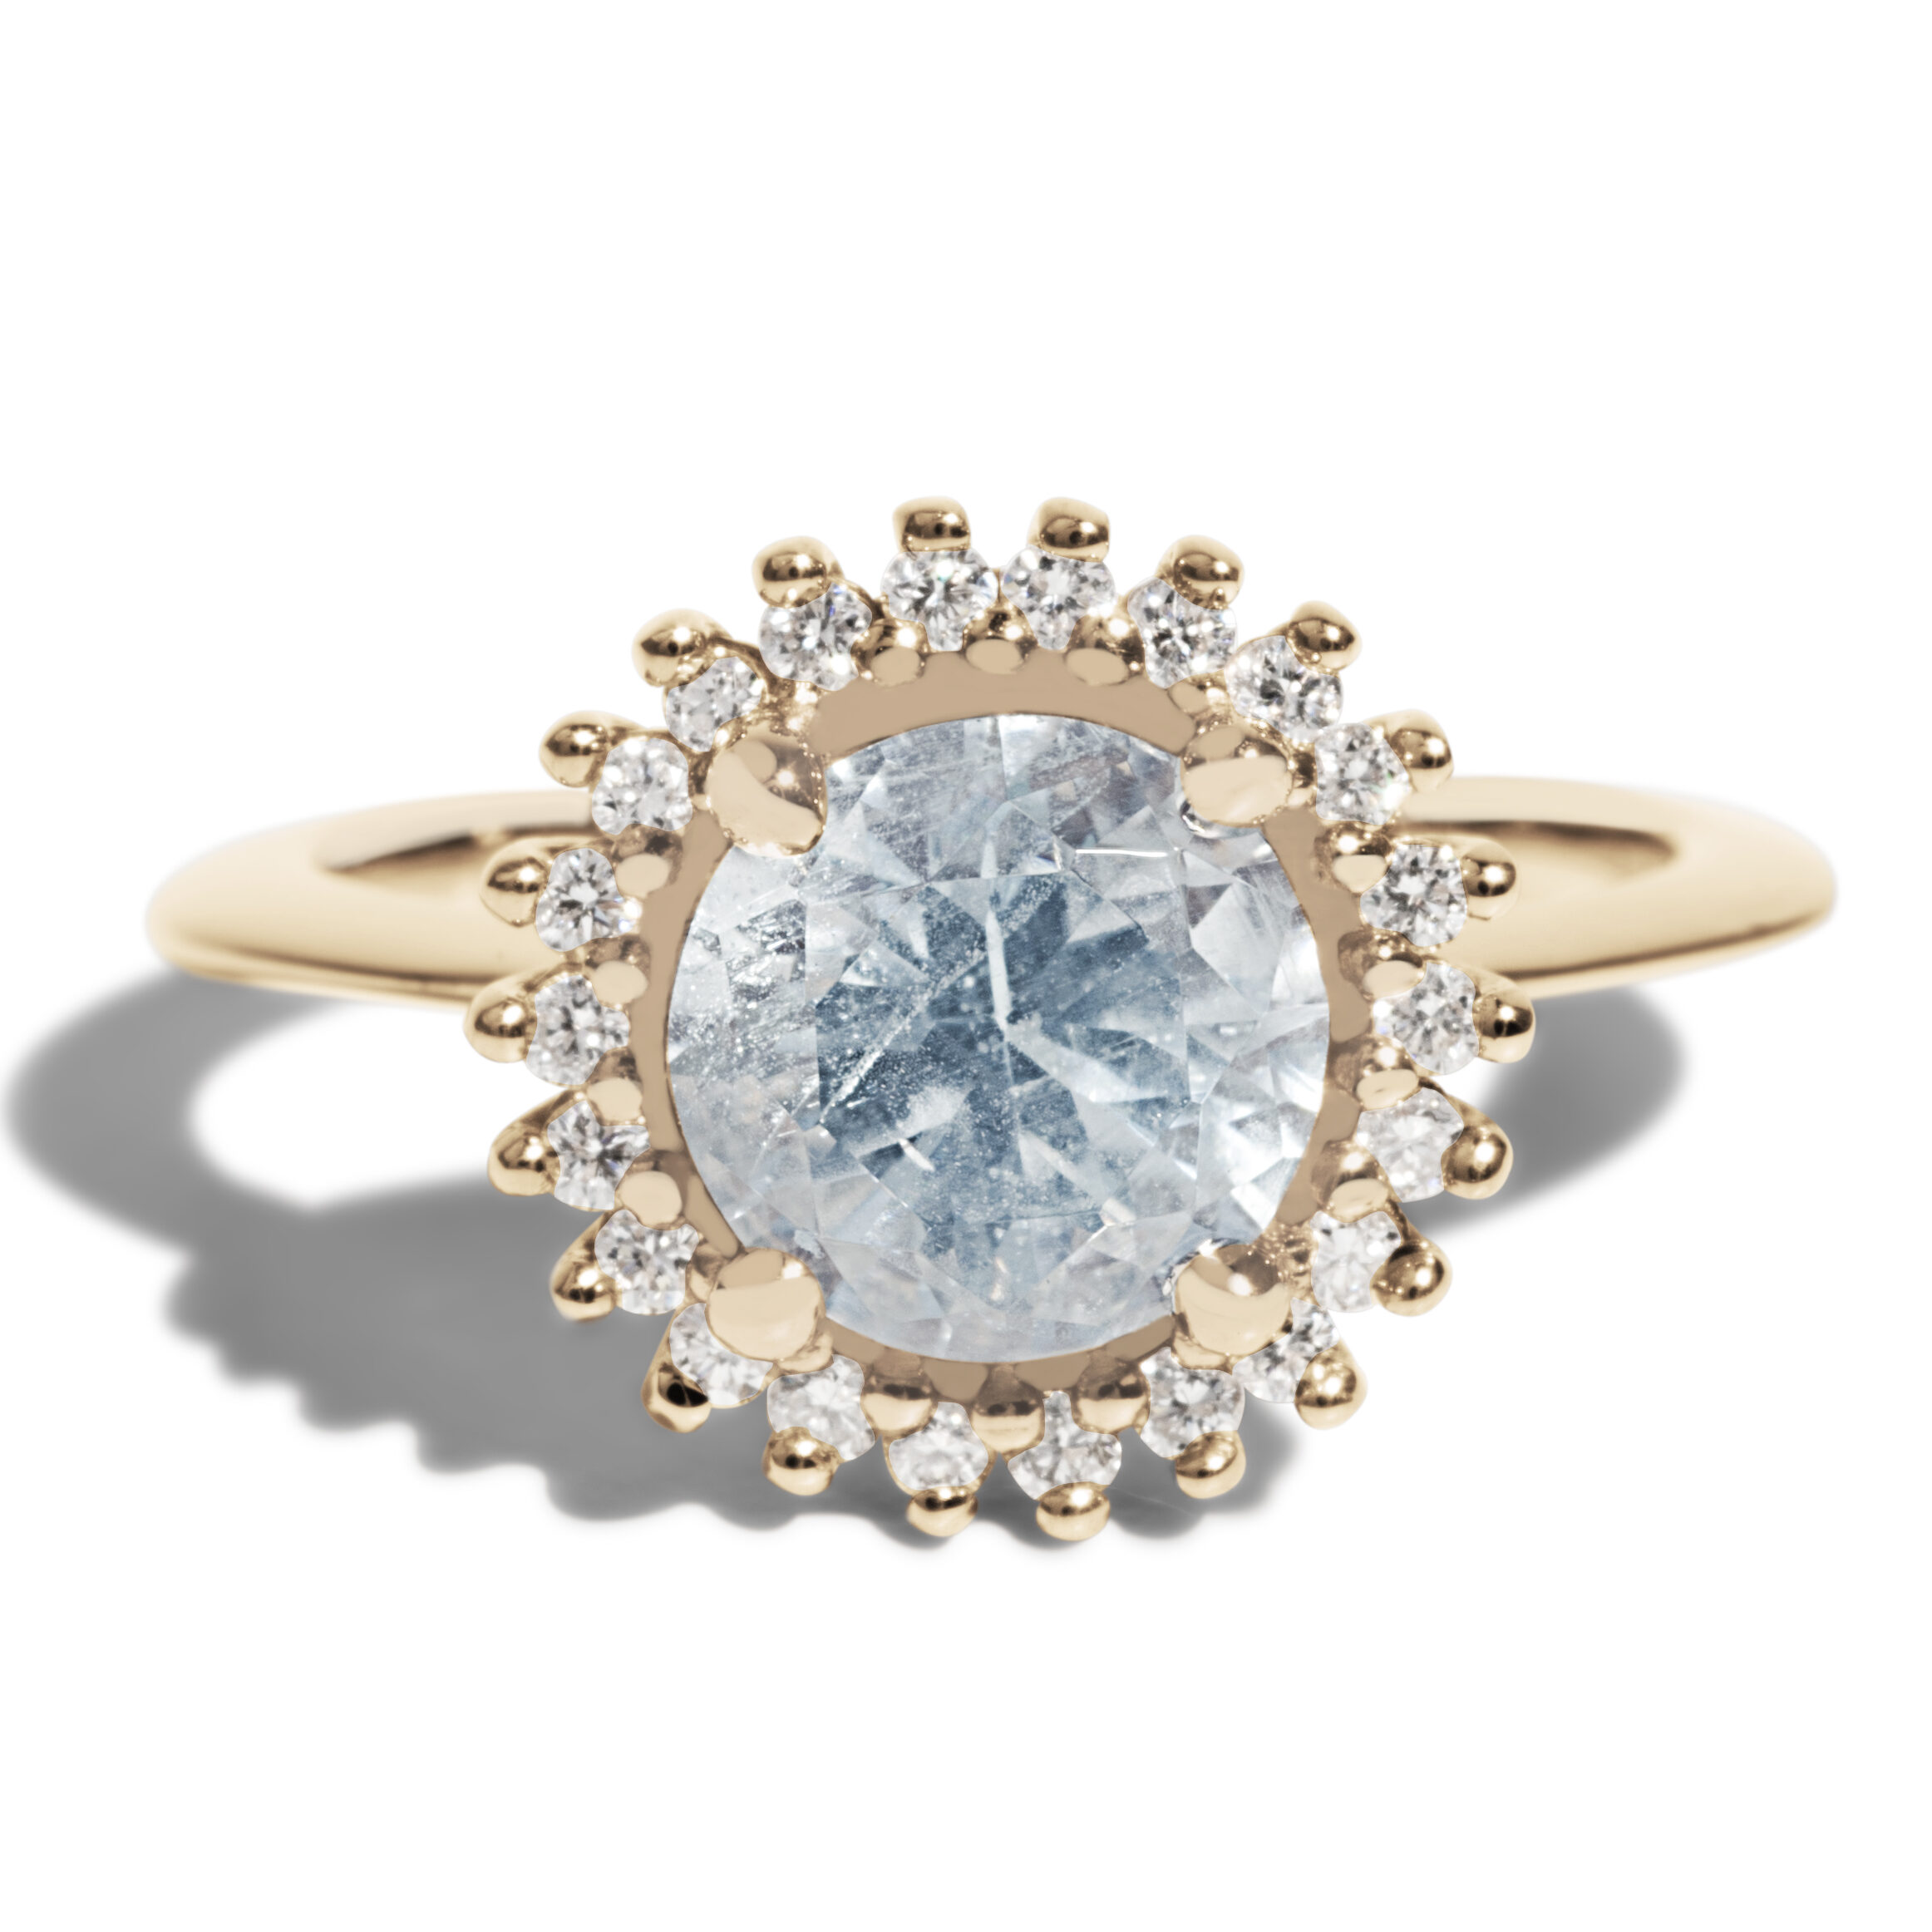 This classic halo ring features a aquamarine center stone with a diamond halo.